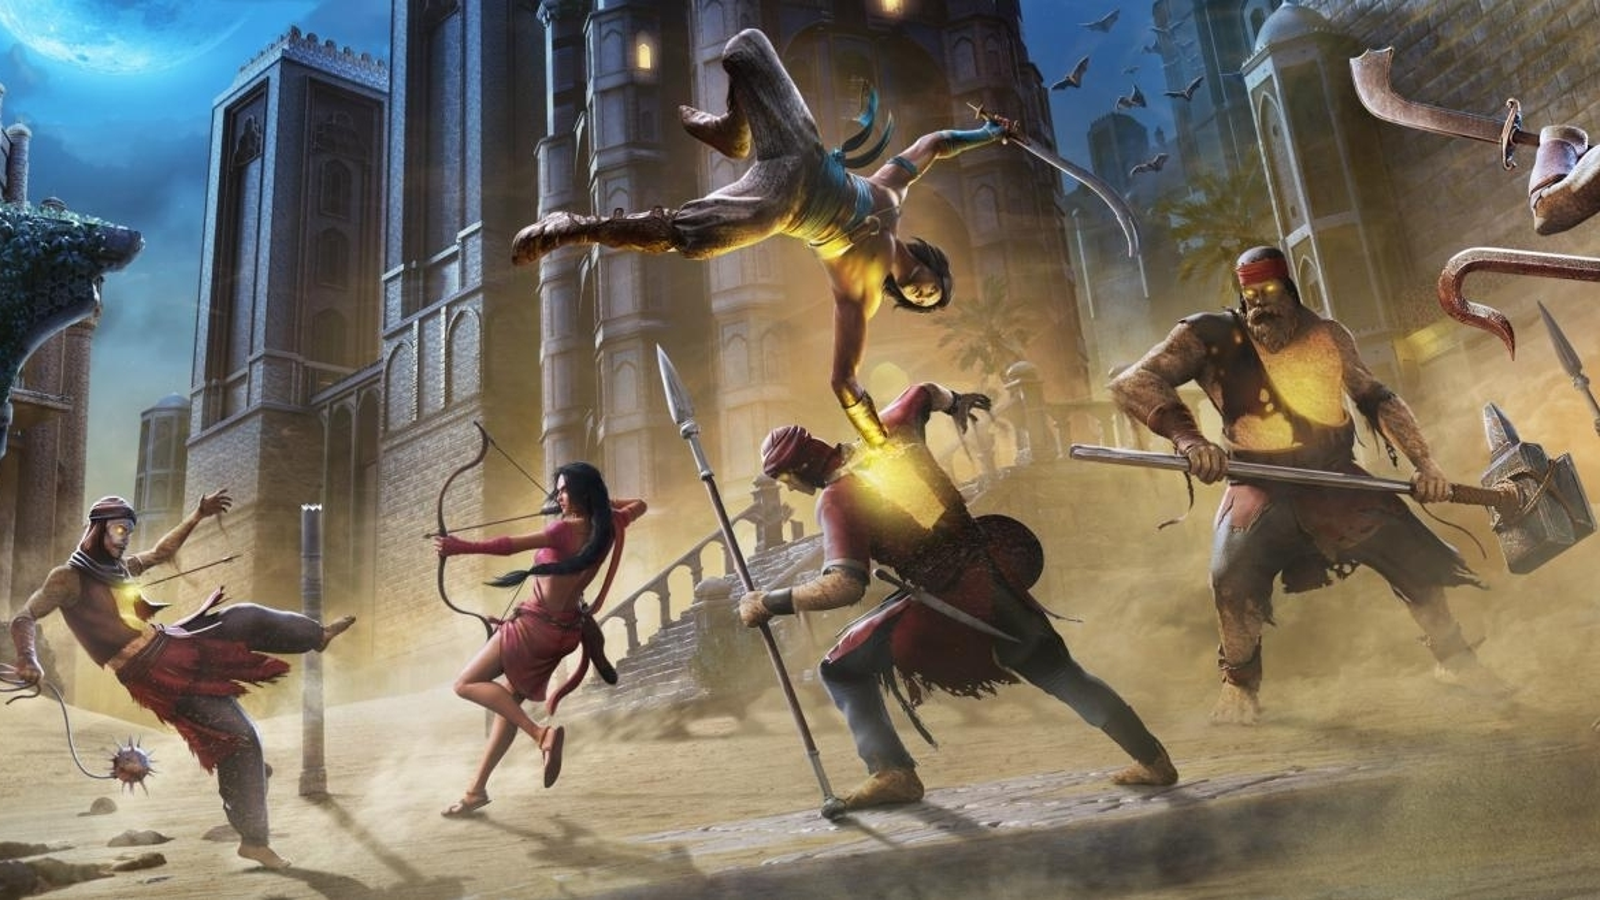 Prince of Persia: The Sands of Time remake returns to 'conception stage